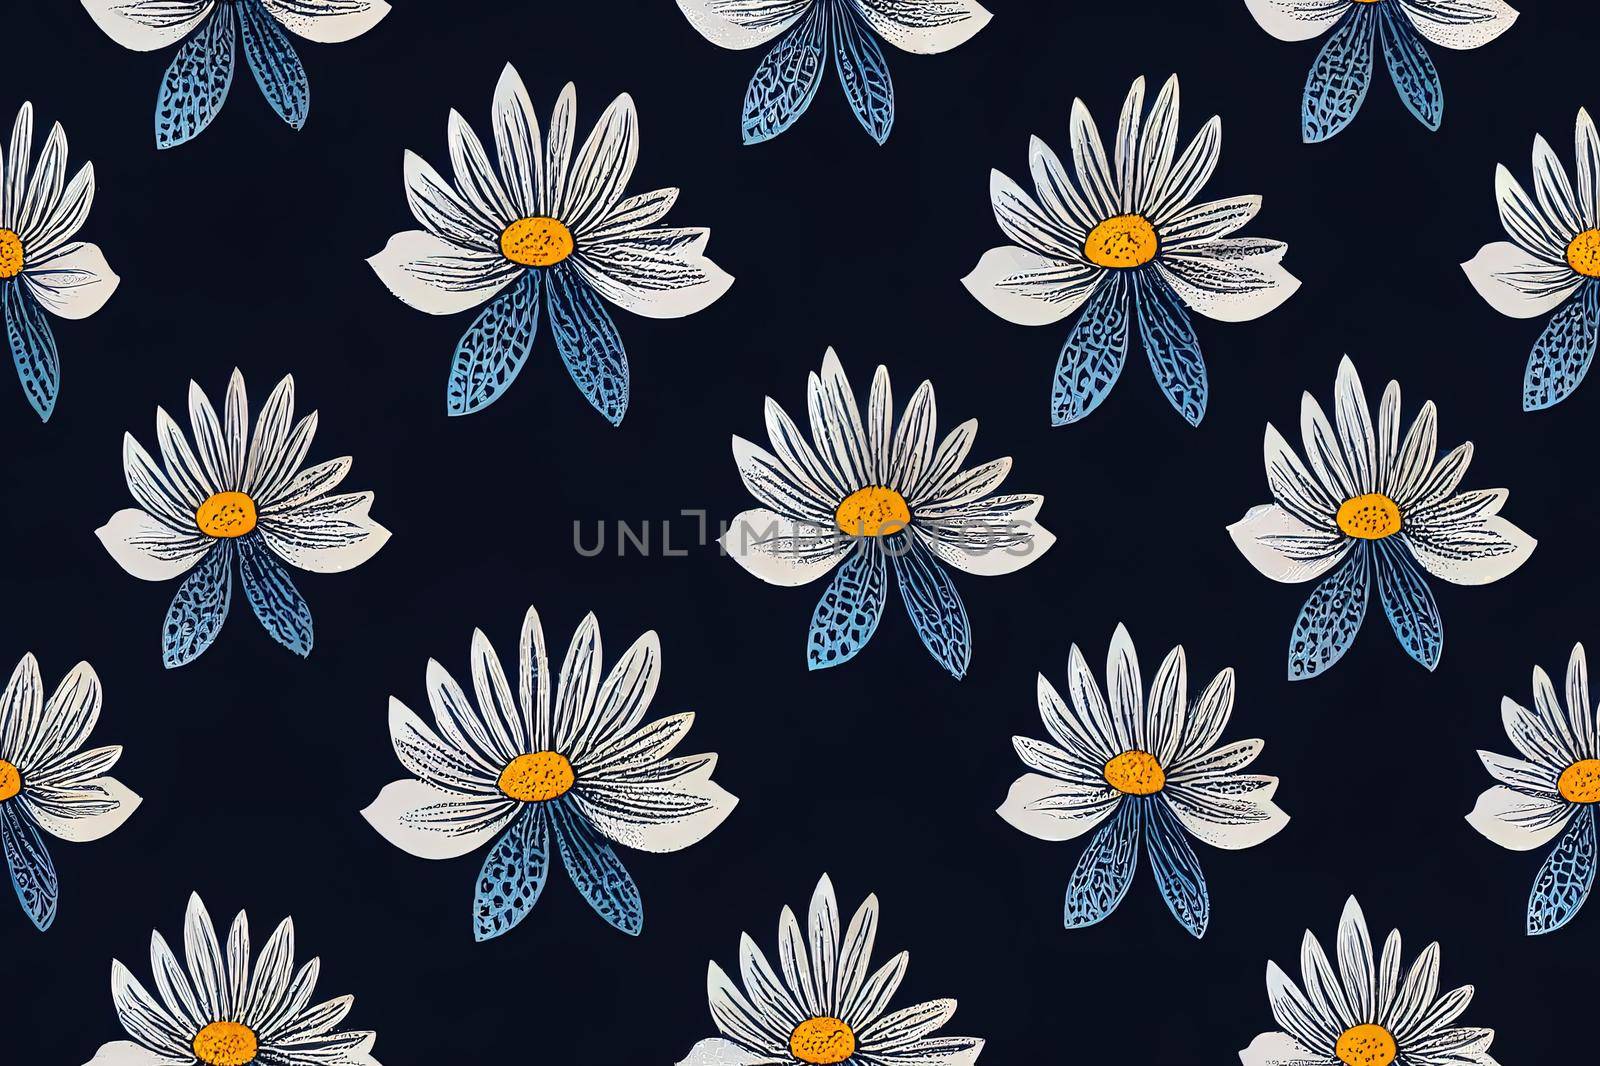 Daisy seamless pattern on dark blue background. Floral ditsy by 2ragon